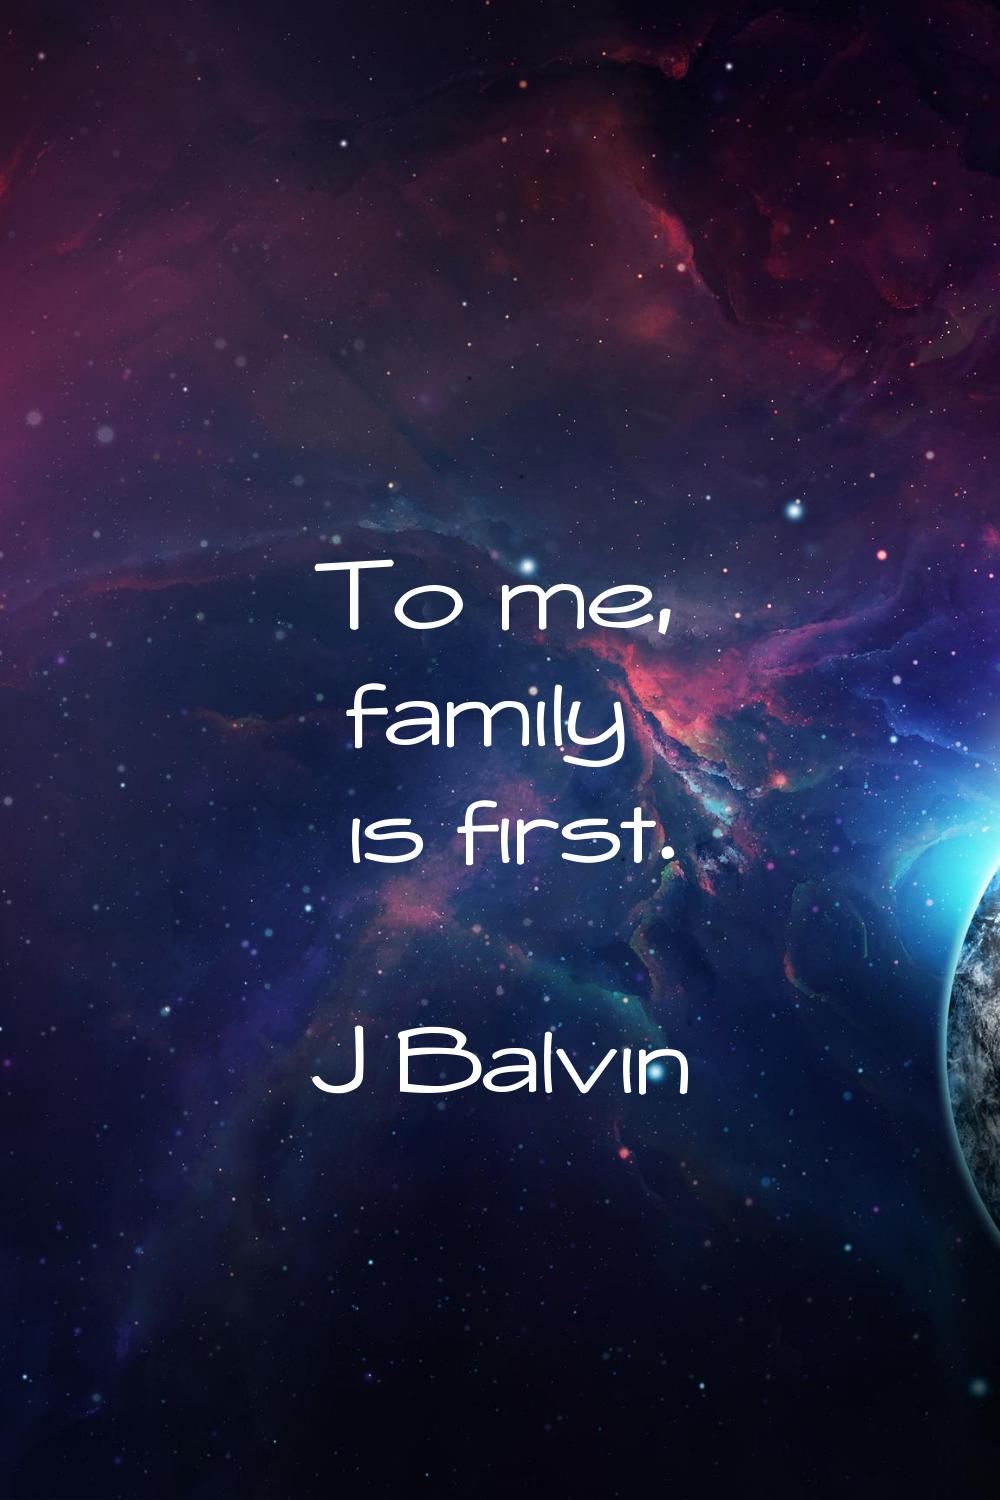 To me, family is first.